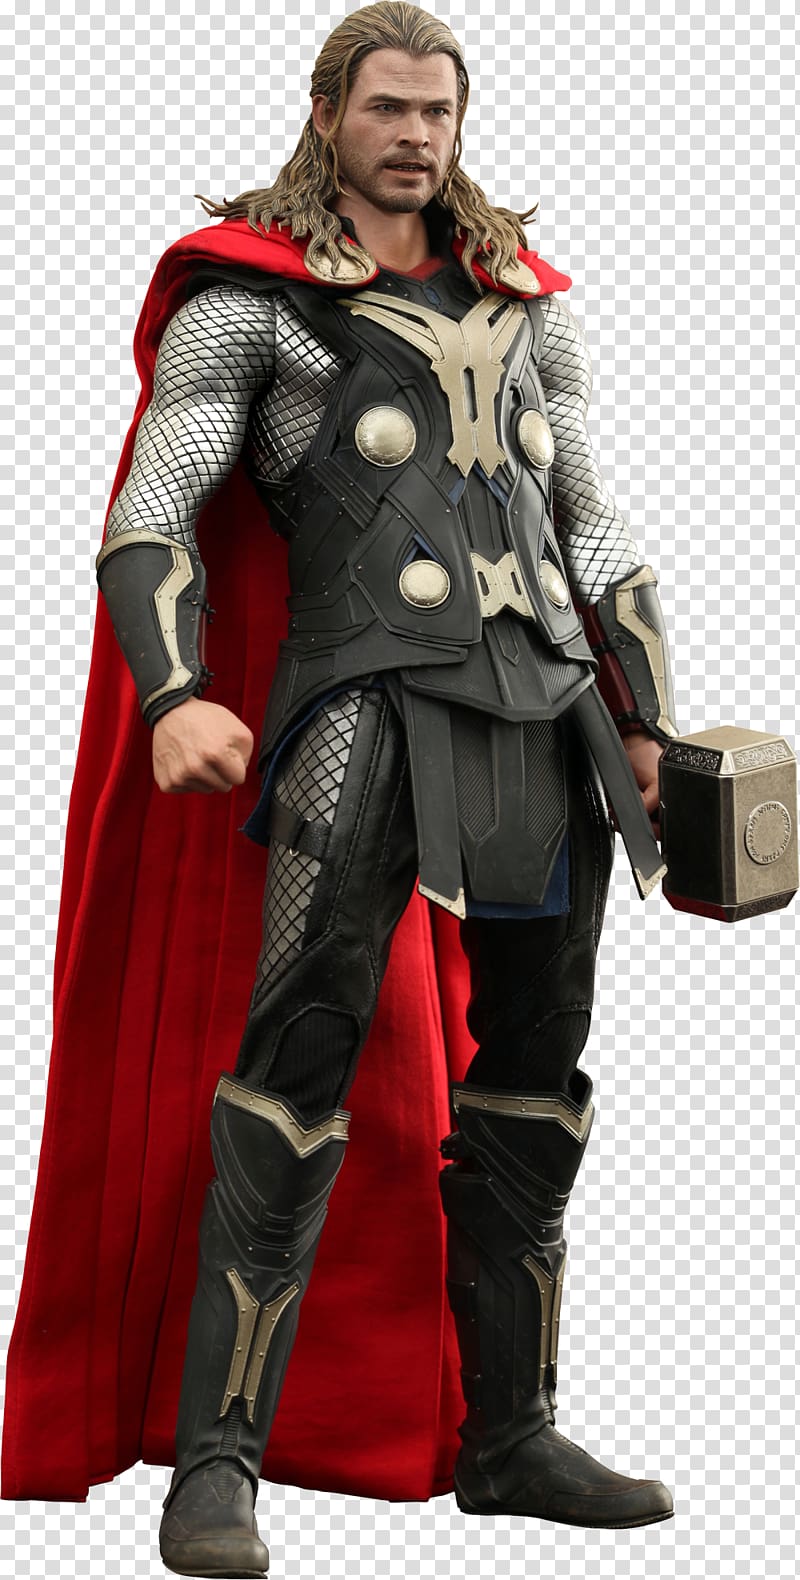 Thor: The Dark World Loki Black Widow Hot Toys Limited, Thor transparent background PNG clipart